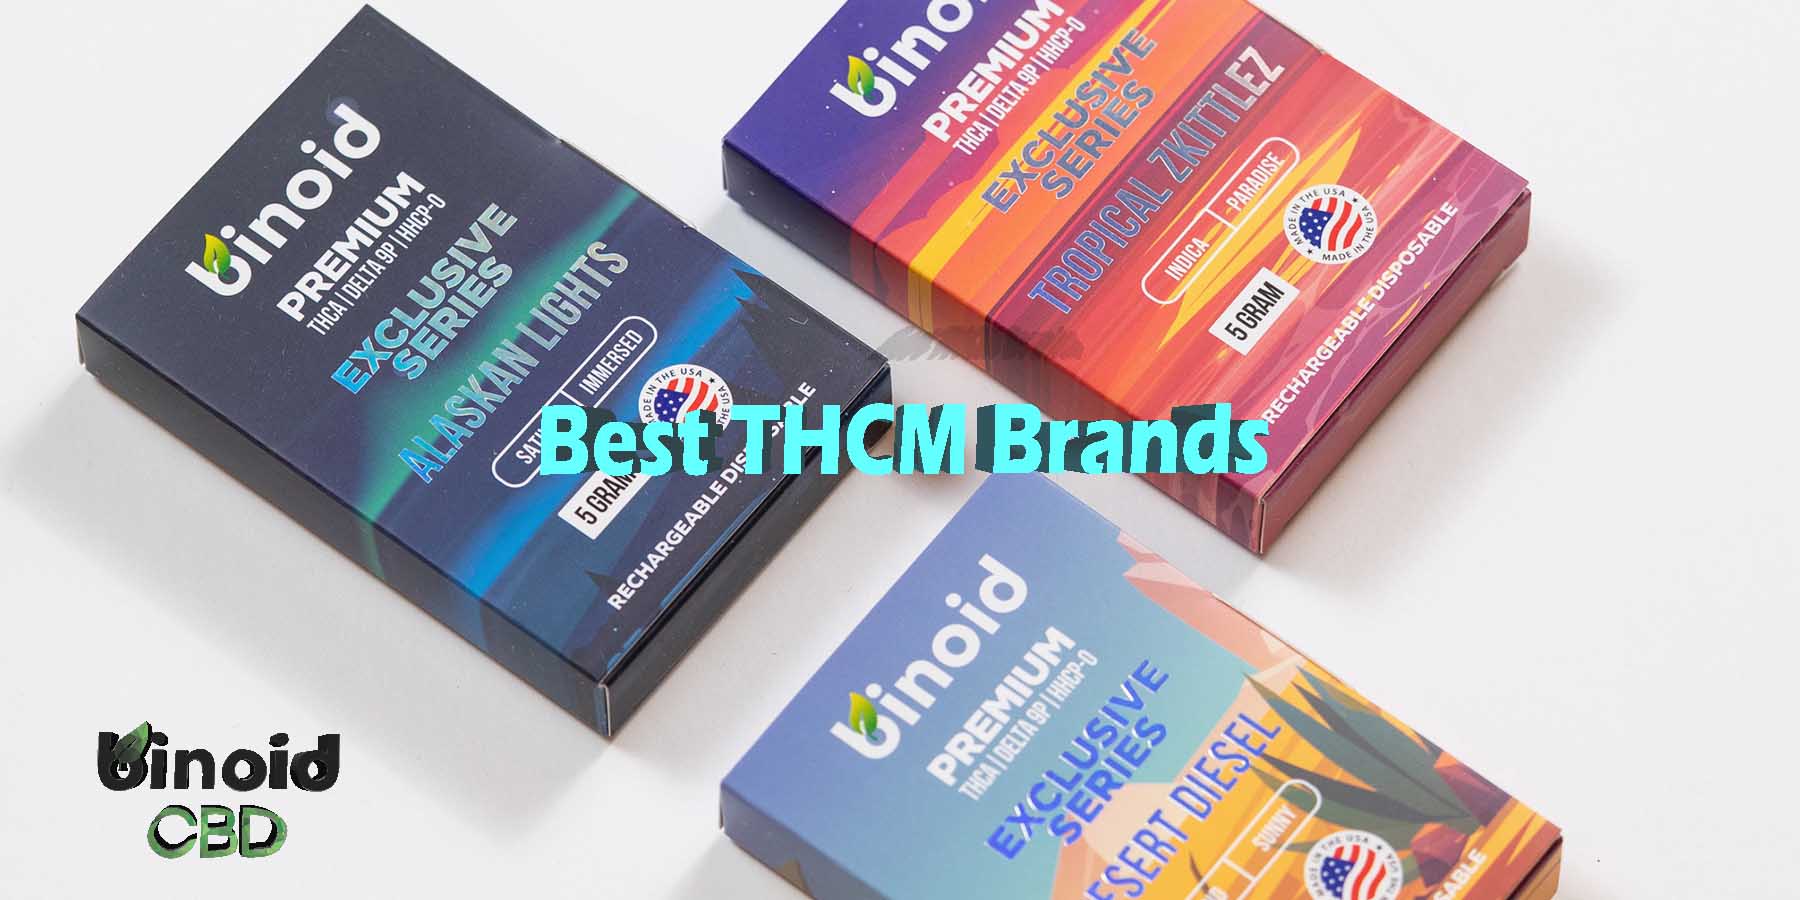 Best THCM Brands 5 Gram Review Take Work Online Best Brand Price Get Near-Me Lowest Coupon Discount Store Shop Vapes Carts Online Strongest Smoke Shop Binoid